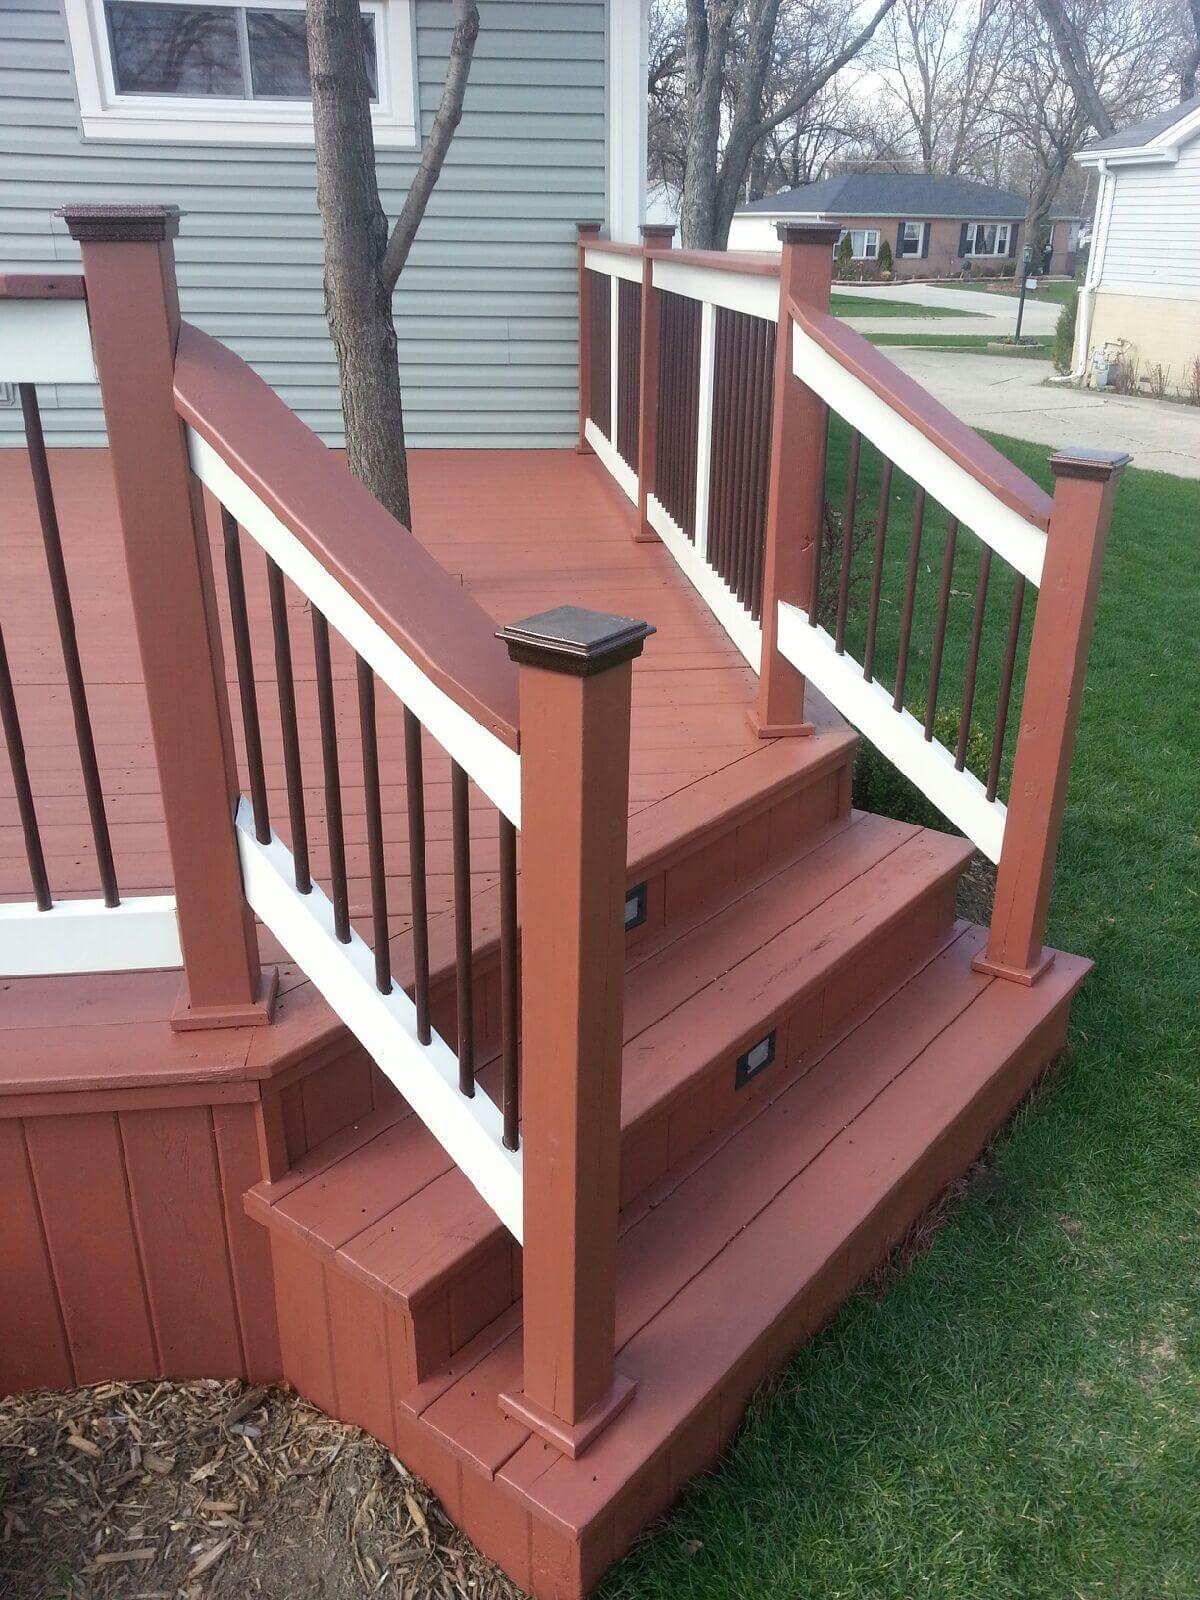 Repairs and maintenance for your deck, fence, and exterior wood staining. - Deck Staining Gilberts - Deck Cleaning Services